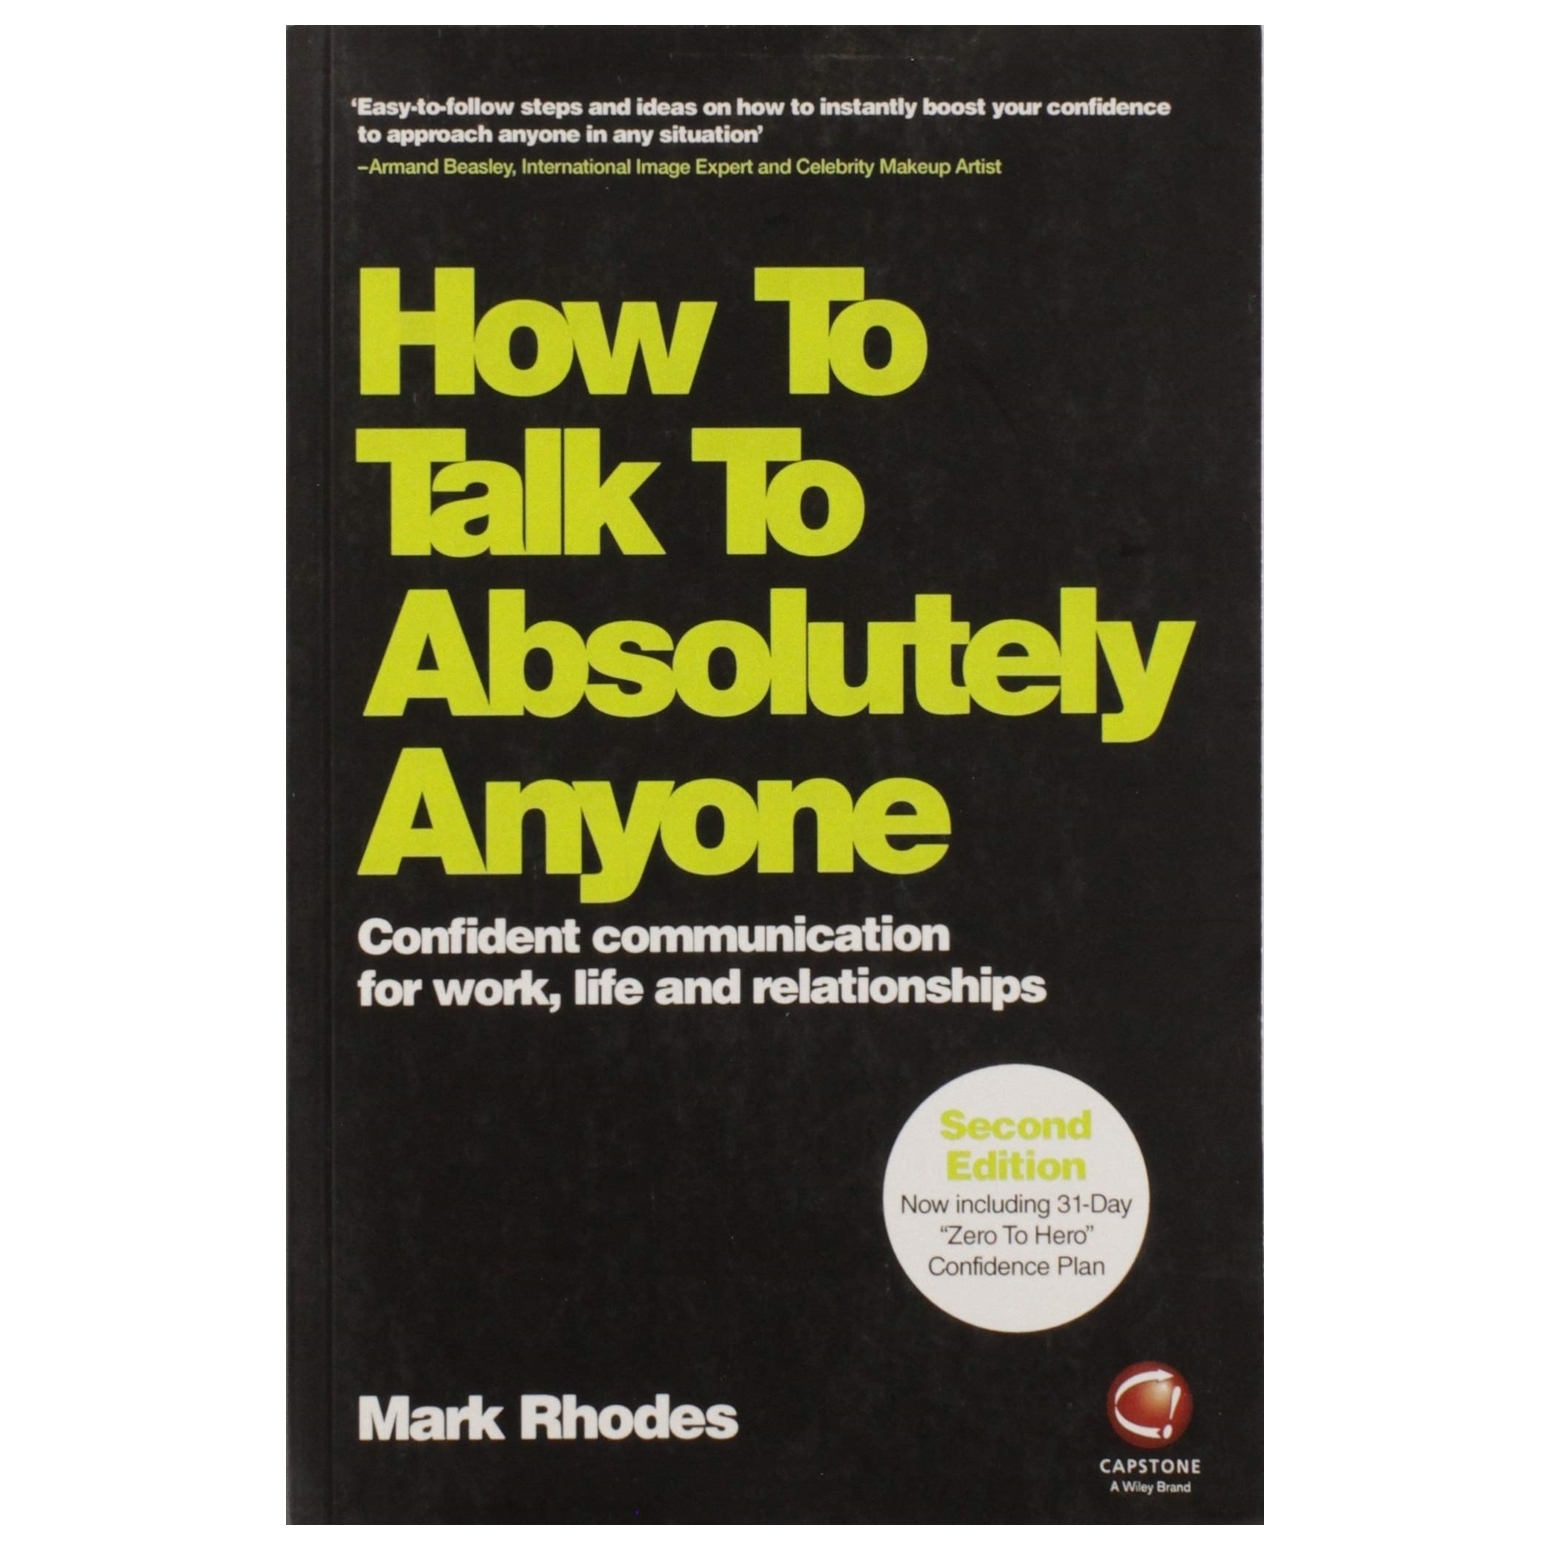 How To Talk To Absolutely Anyone - Confident Communication For Work, Life And Relationships